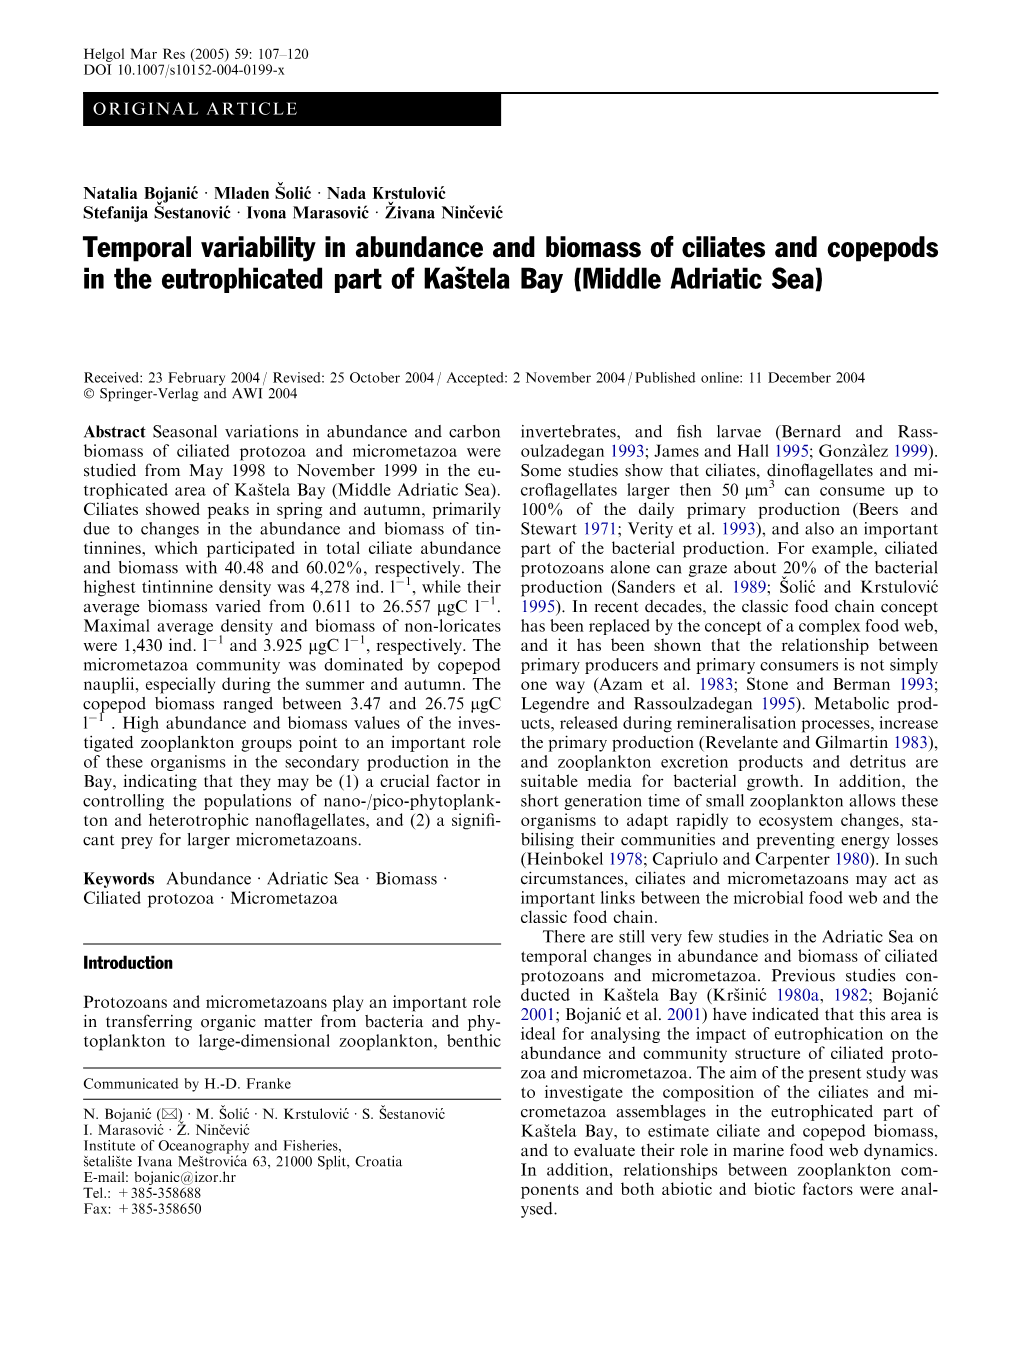 Temporal Variability in Abundance and Biomass of Ciliates and Copepods in the Eutrophicated Part of Kasˇtela Bay (Middle Adriatic Sea)